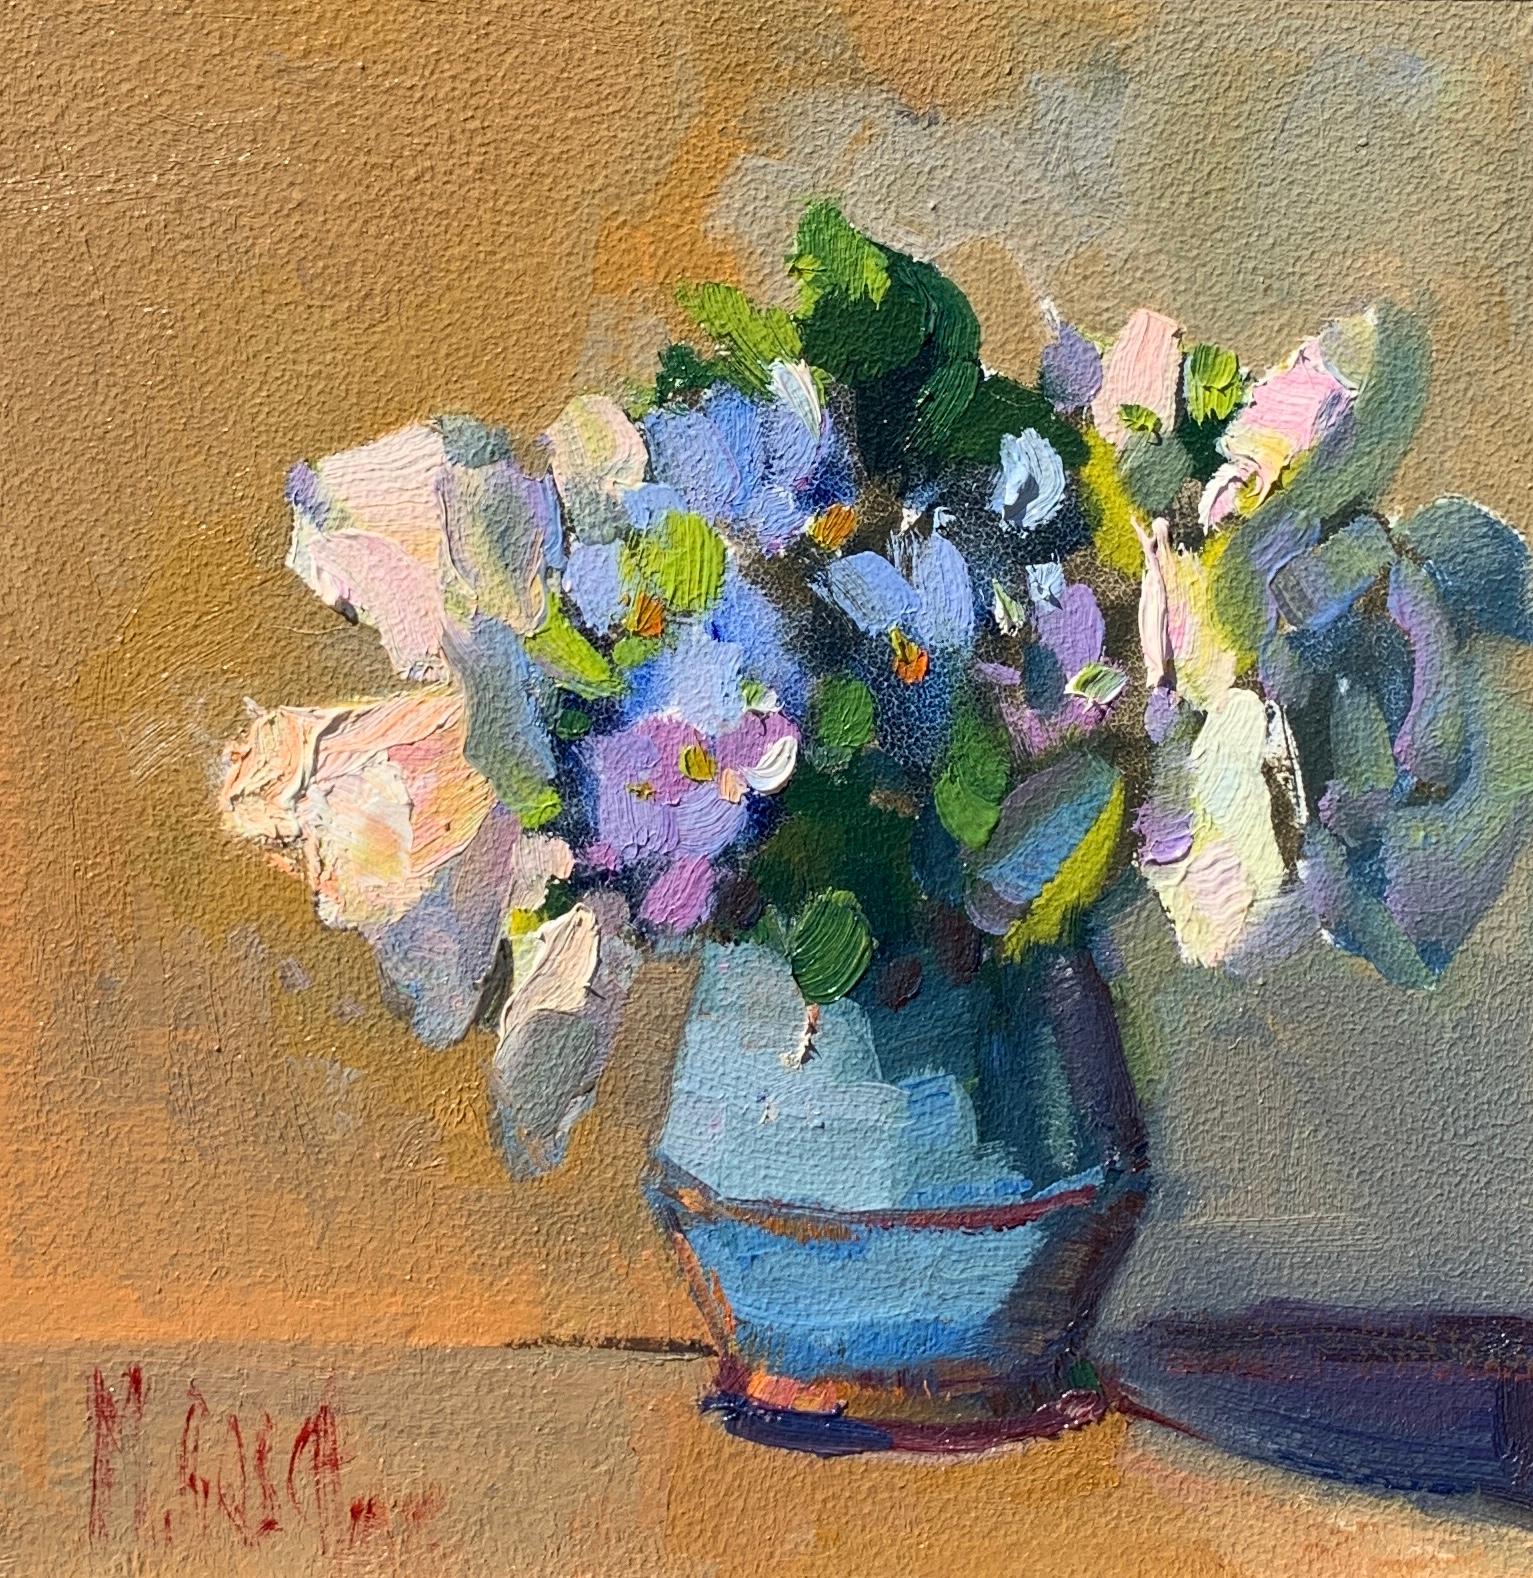 'Spring Botany' is a petite framed Impressionist oil on board still-life painting created by American artist Millie Gosch in 2019. Featuring a palette made of blue, purple, white, brown and green tones among others, this still-life painting depicts